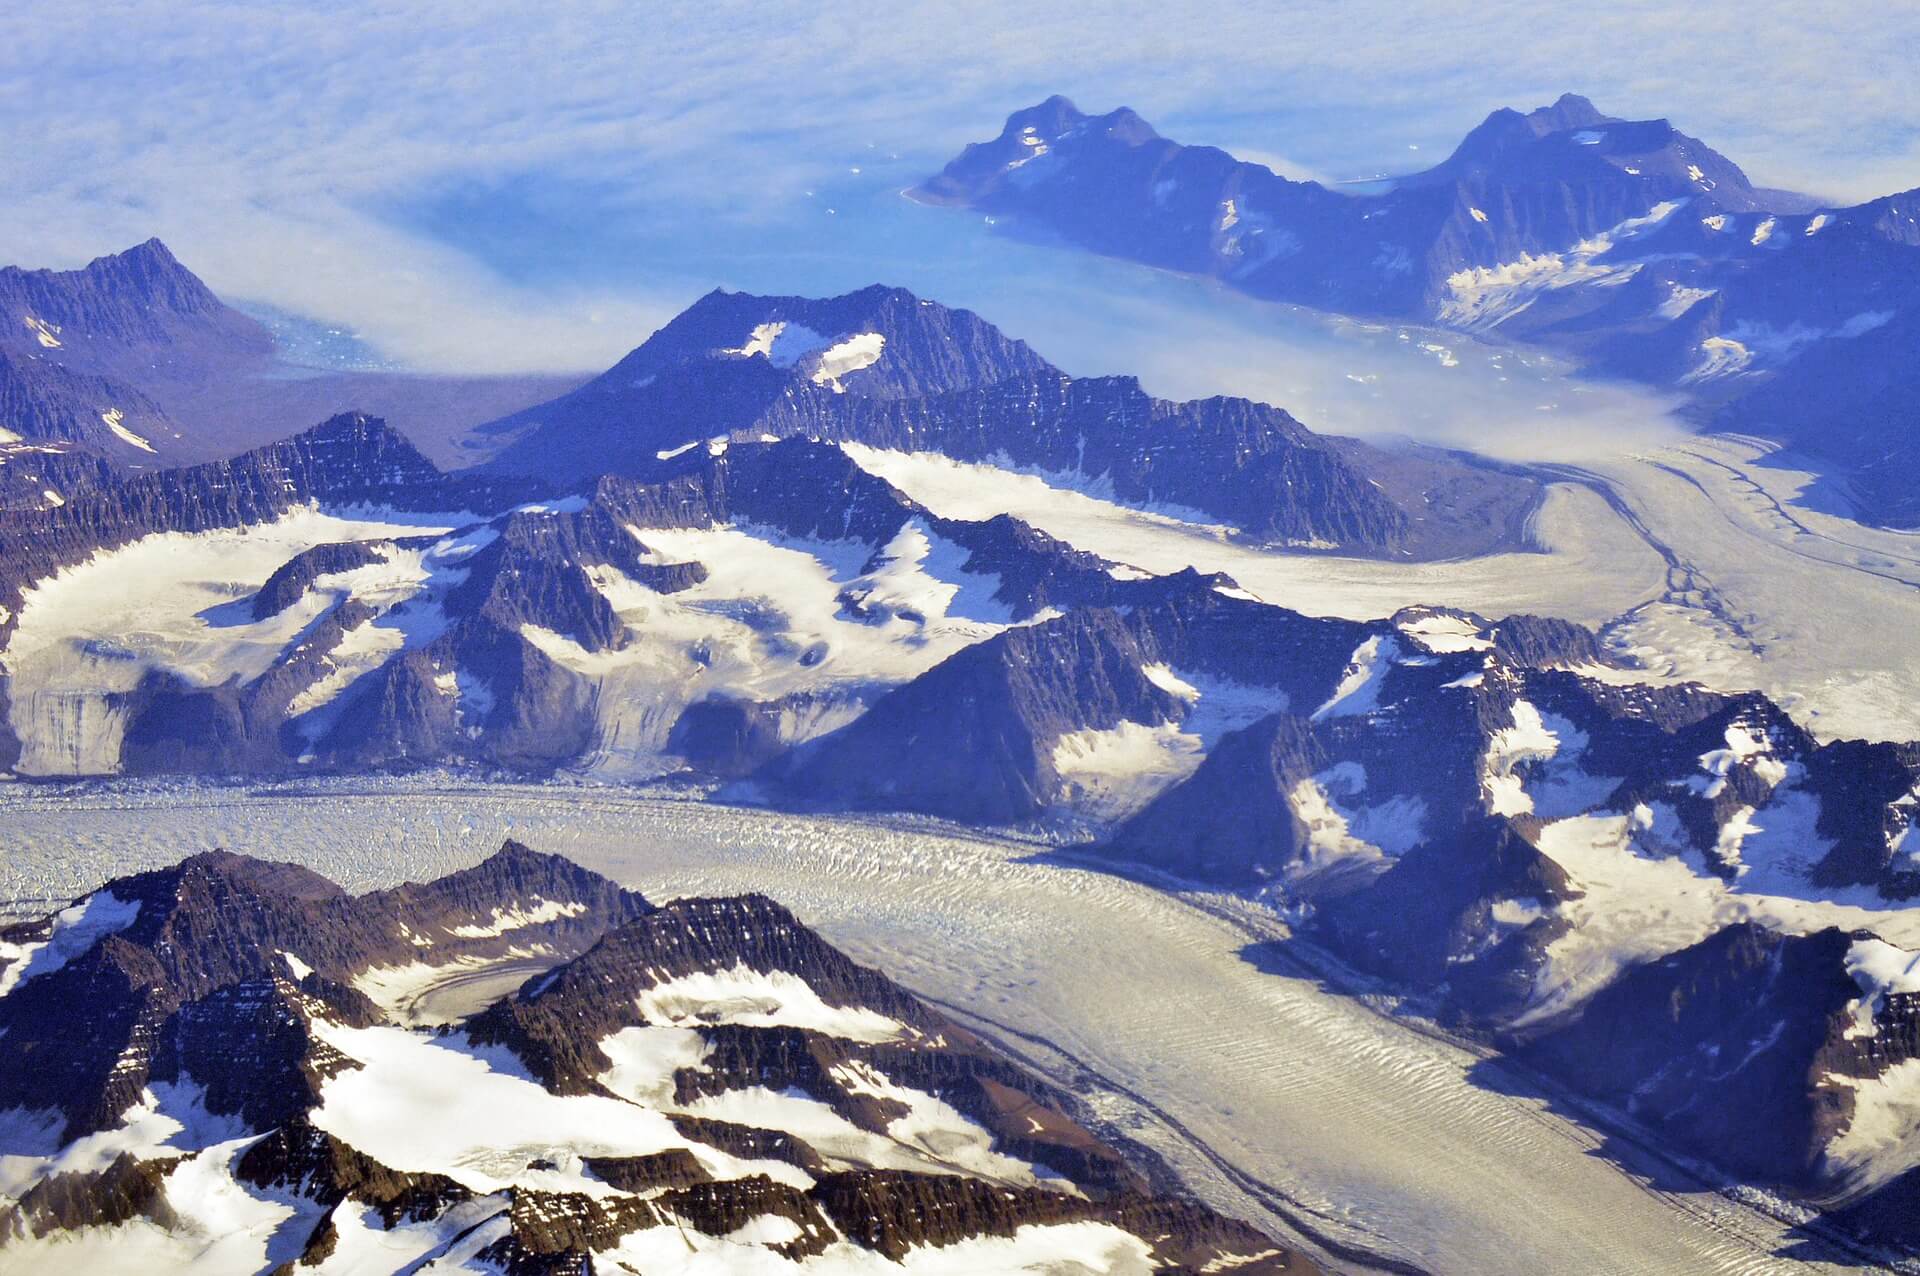 10 Intriguing Facts you should know about Greenland